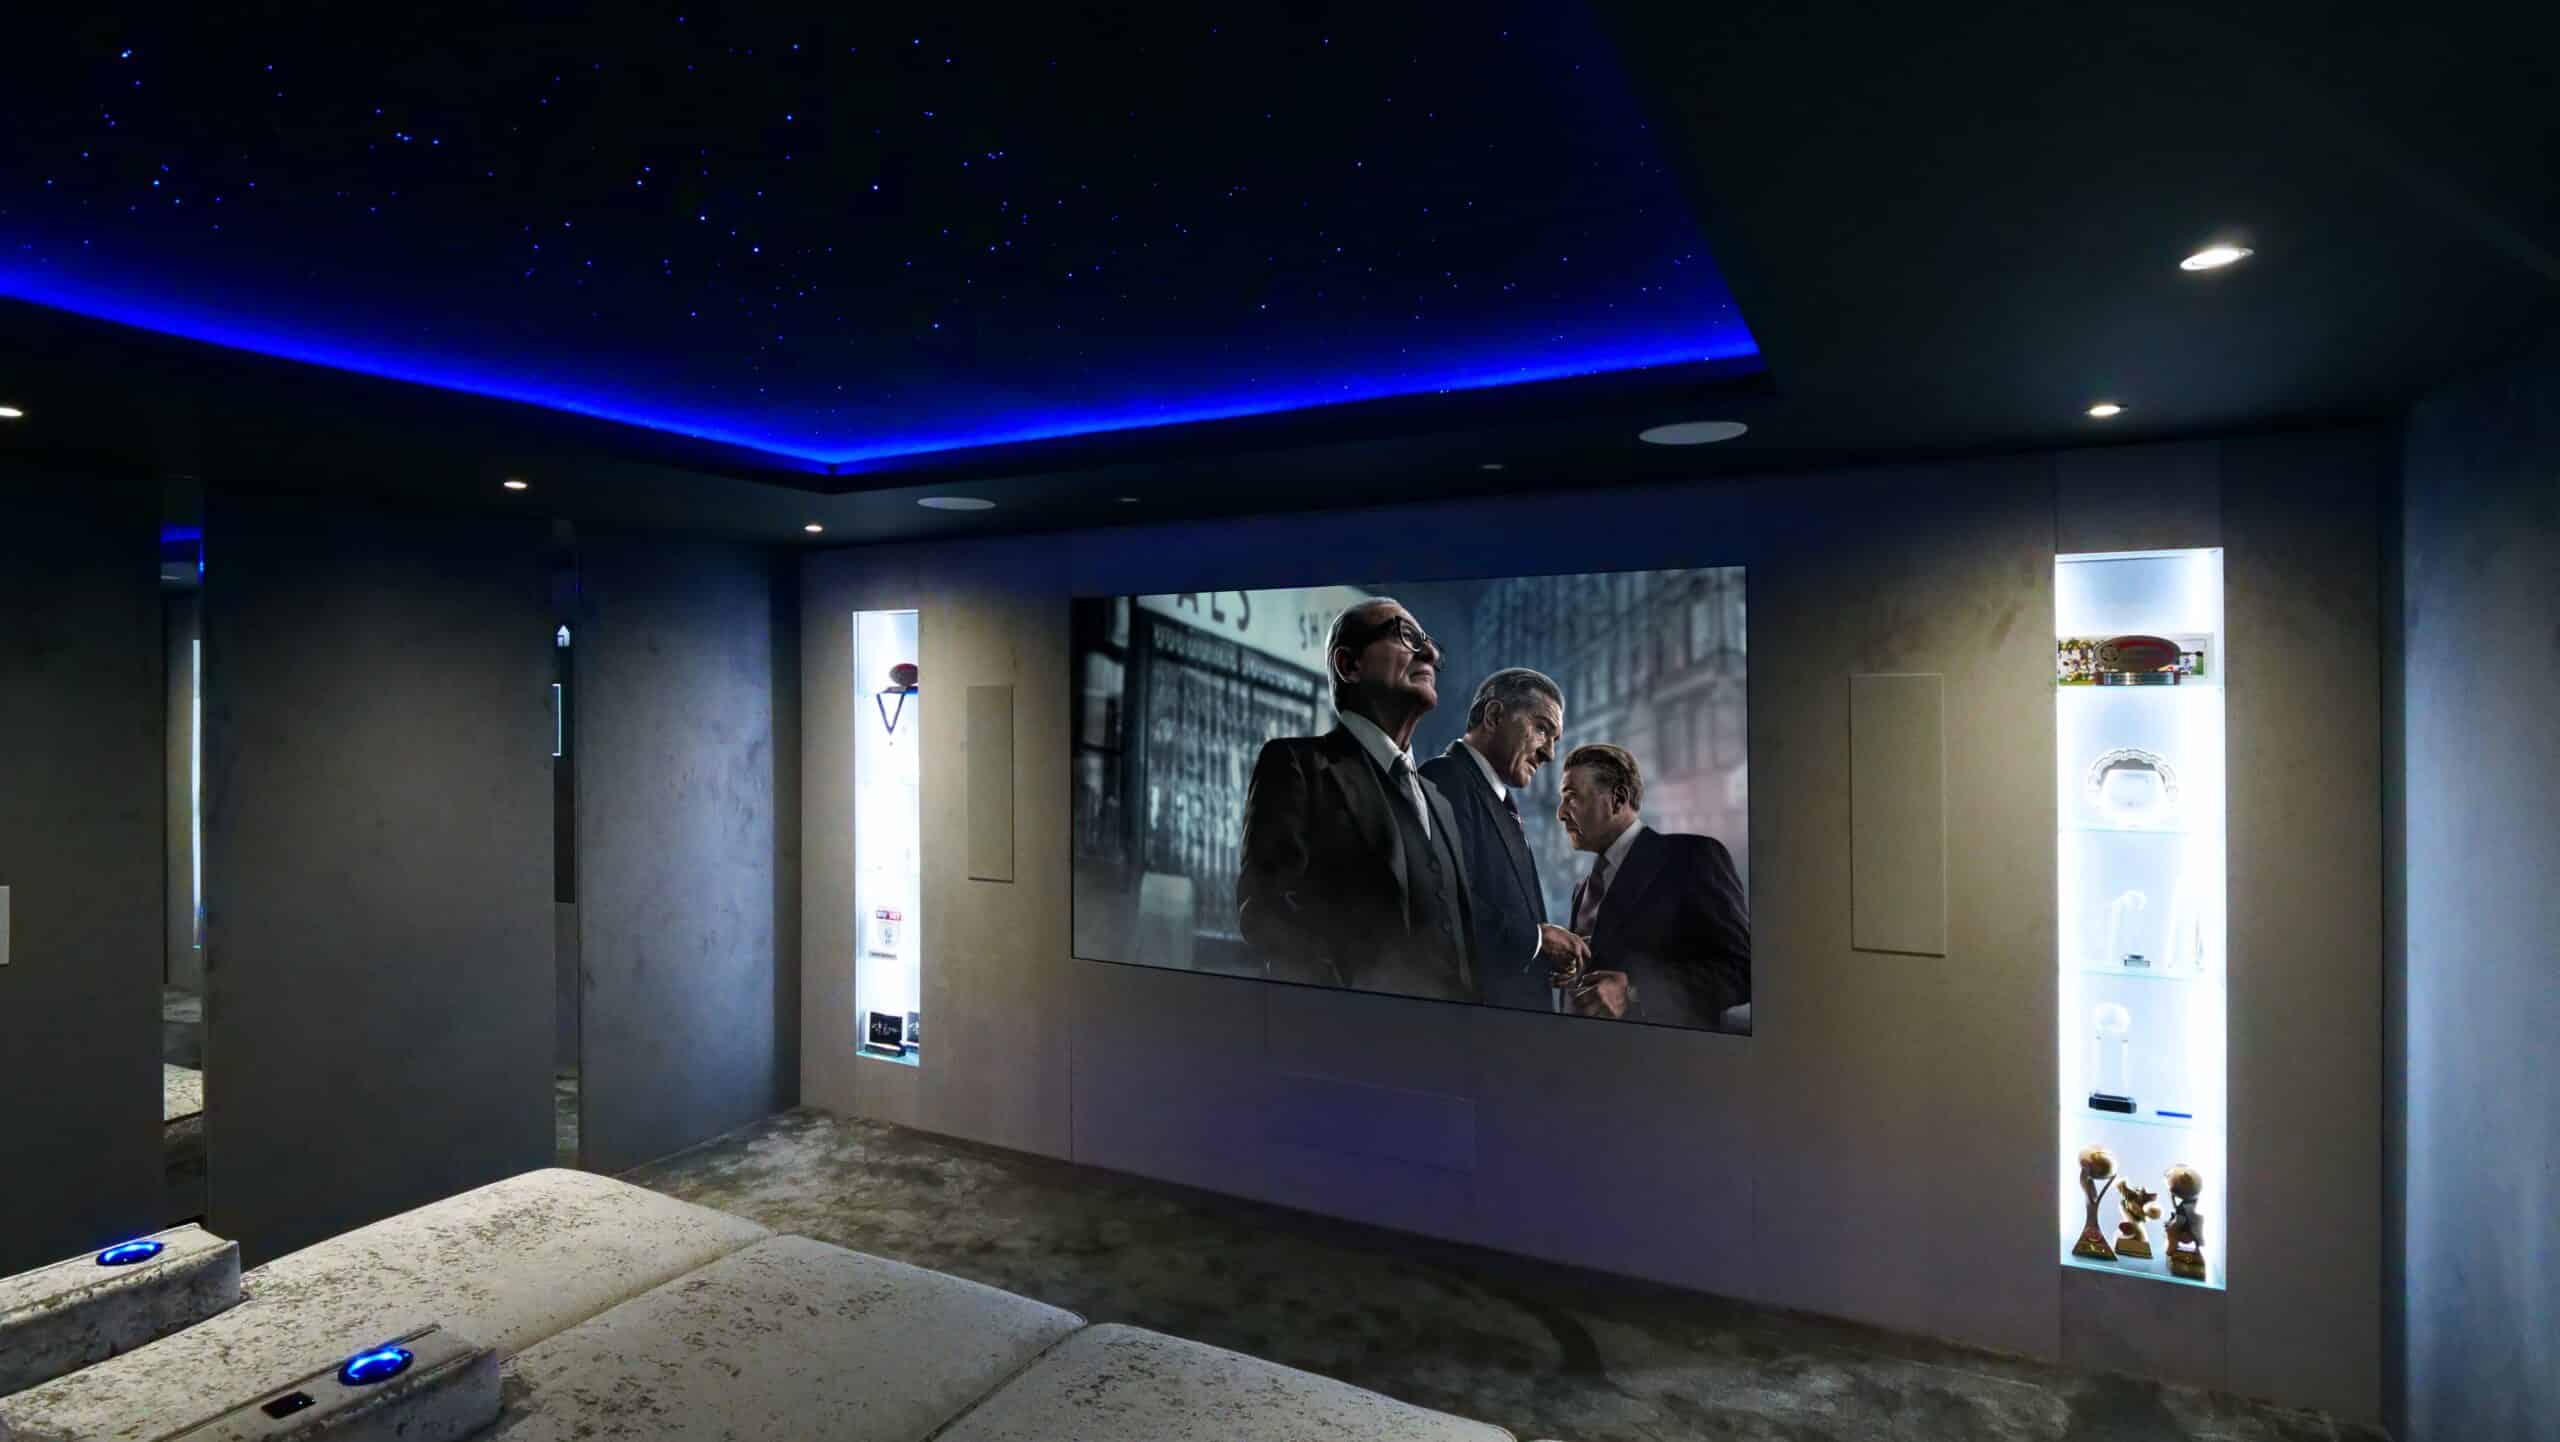 Home cinema installations. We have design and install home cinemas throughout the UK.